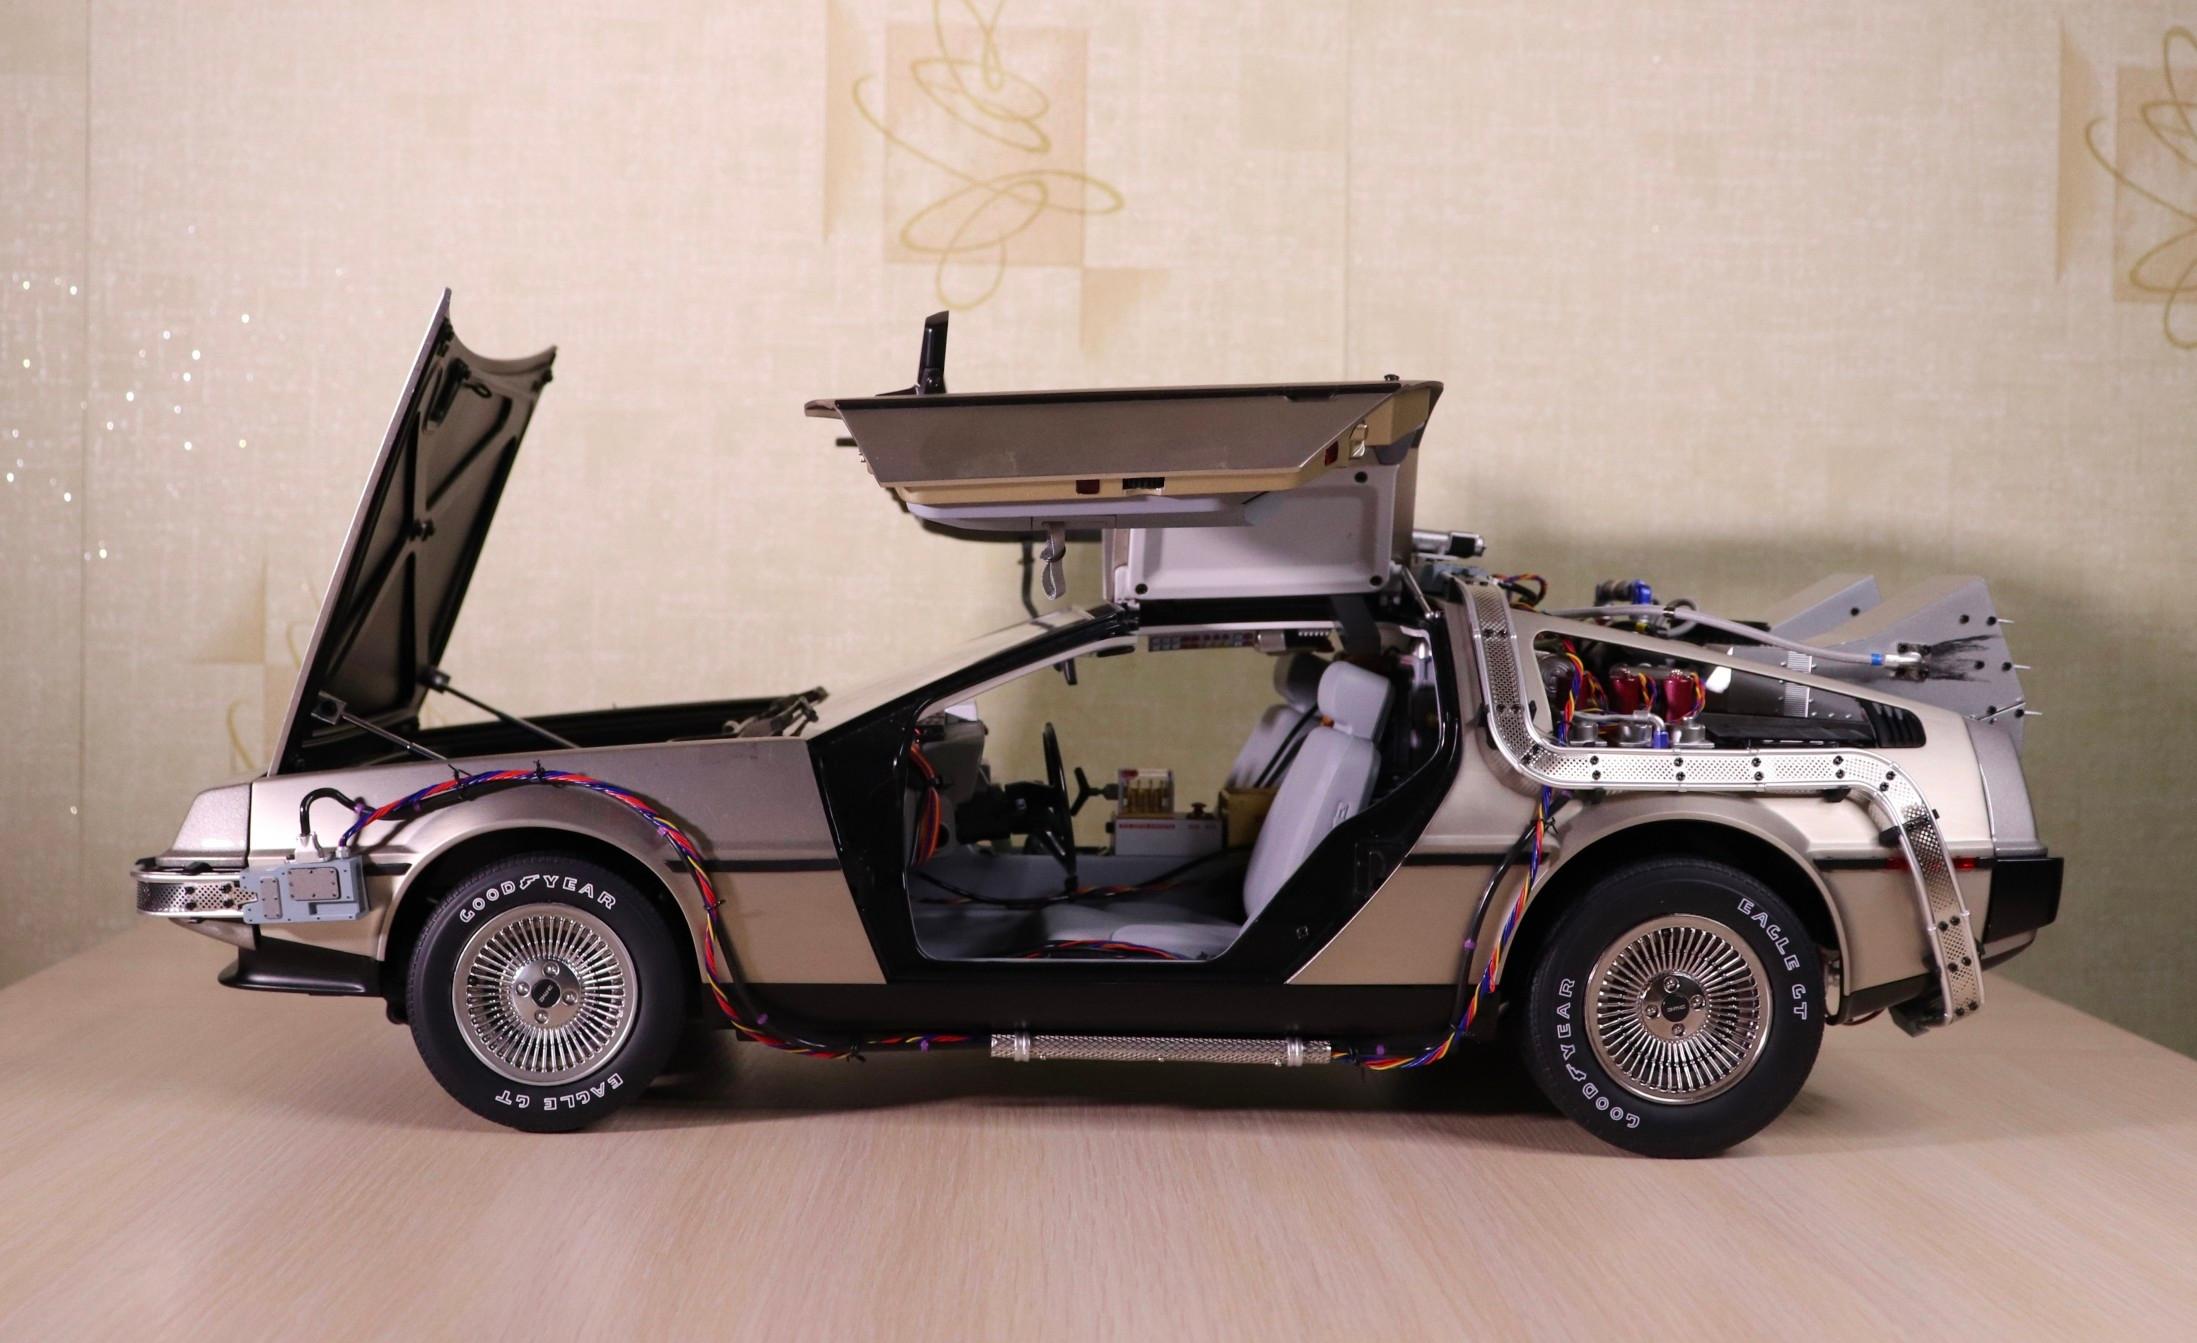 The DeLorean is the unsung hero of ‘Back to the Future’.